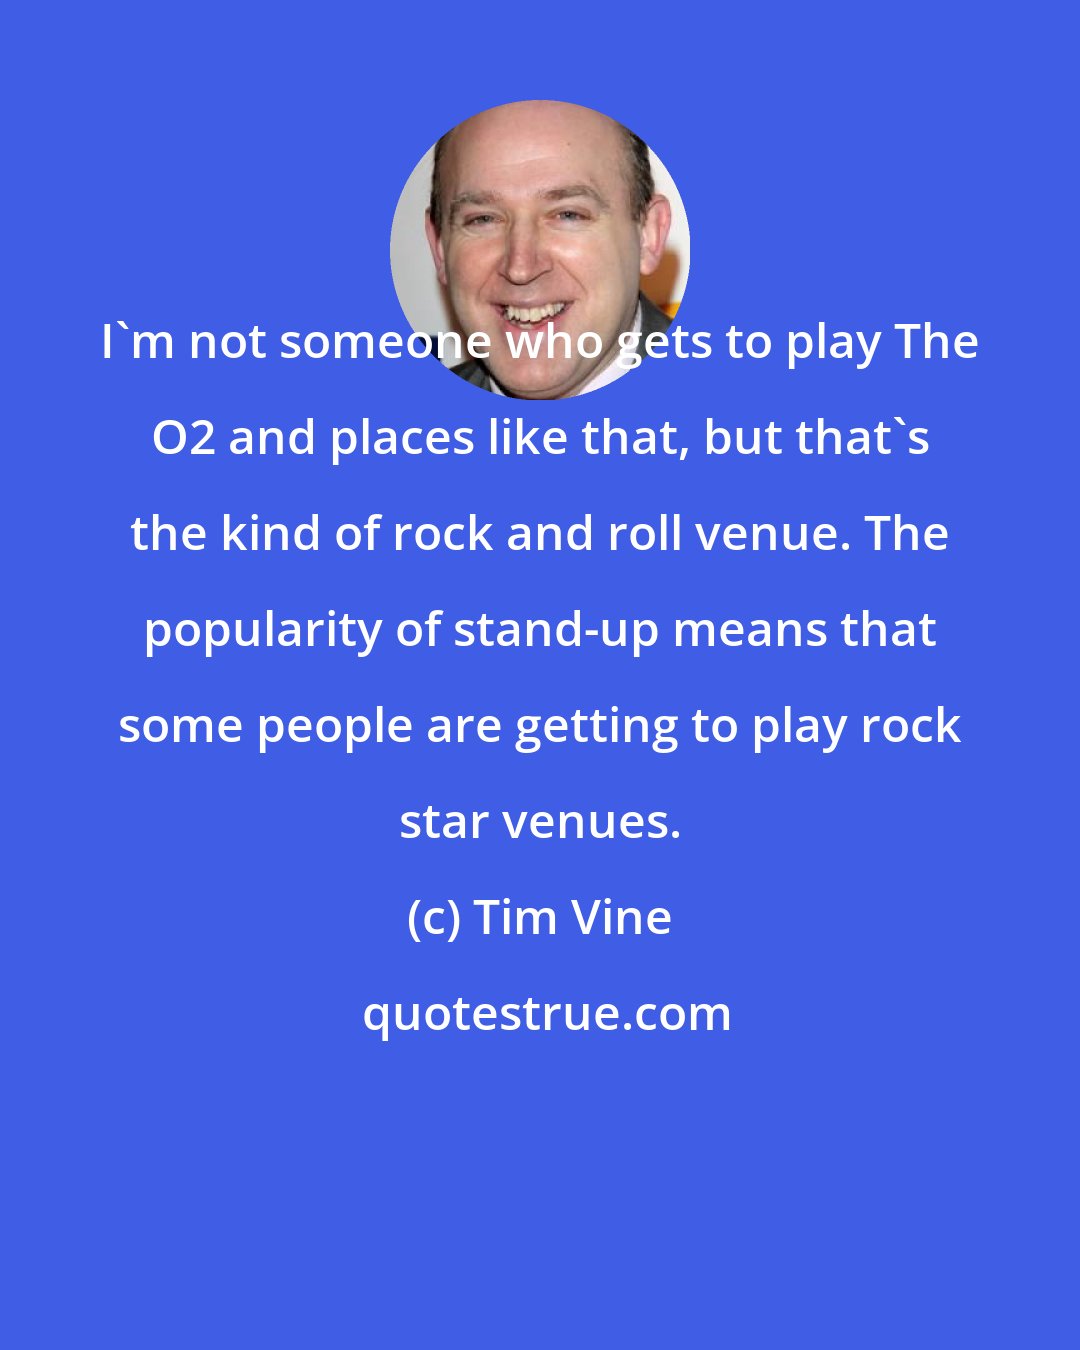 Tim Vine: I'm not someone who gets to play The O2 and places like that, but that's the kind of rock and roll venue. The popularity of stand-up means that some people are getting to play rock star venues.